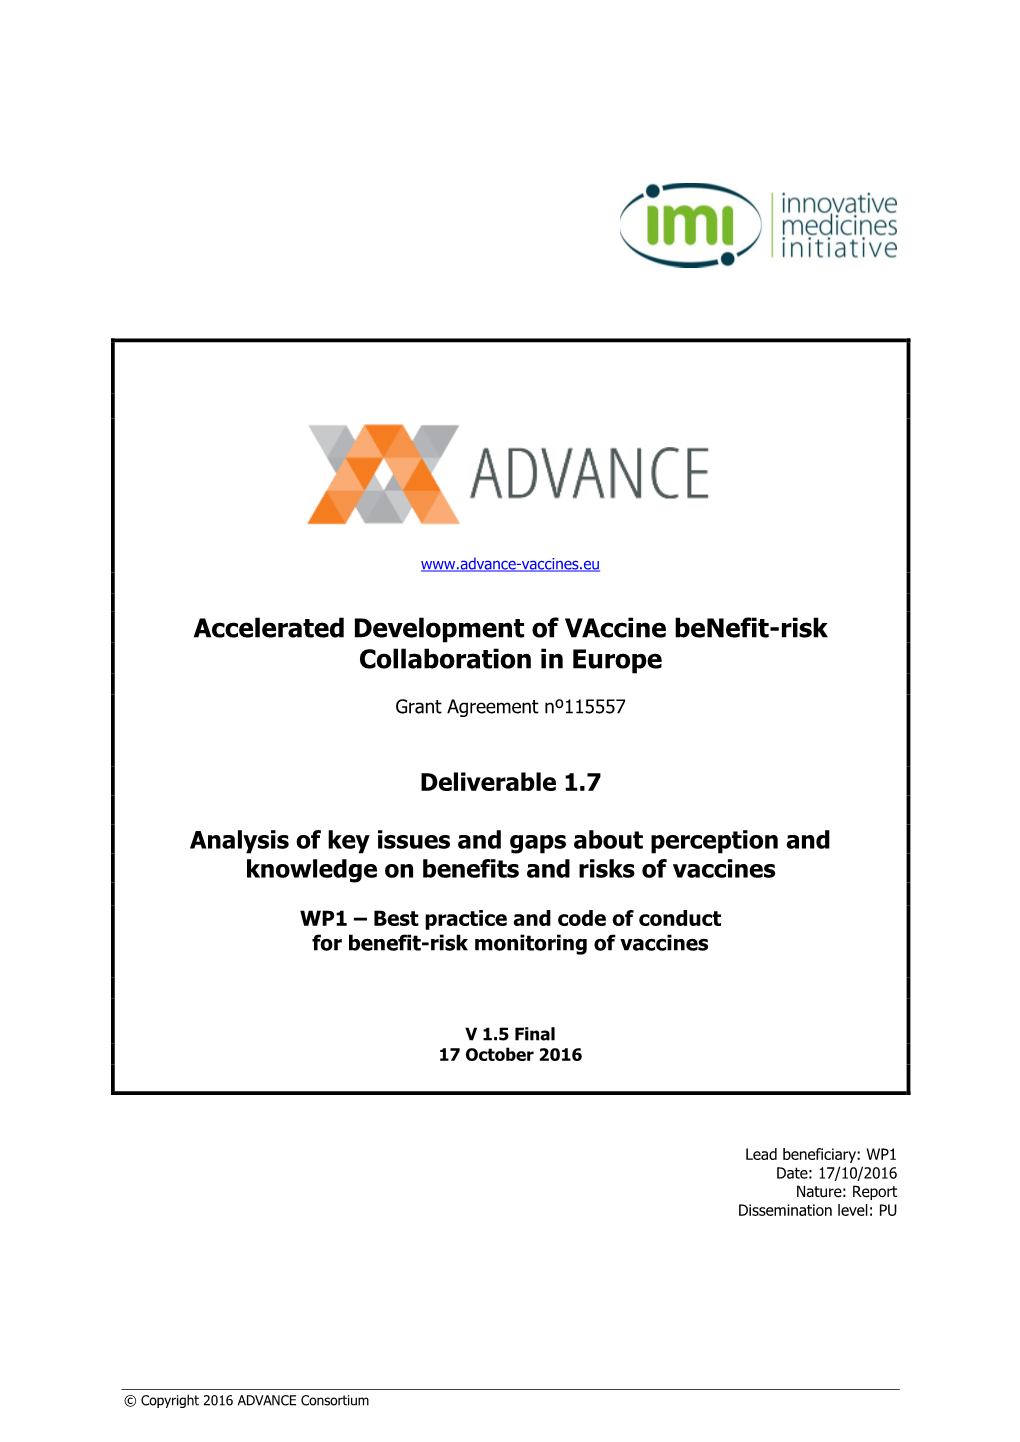 Accelerated Development of Vaccine Benefit-Risk Collaboration in Europe